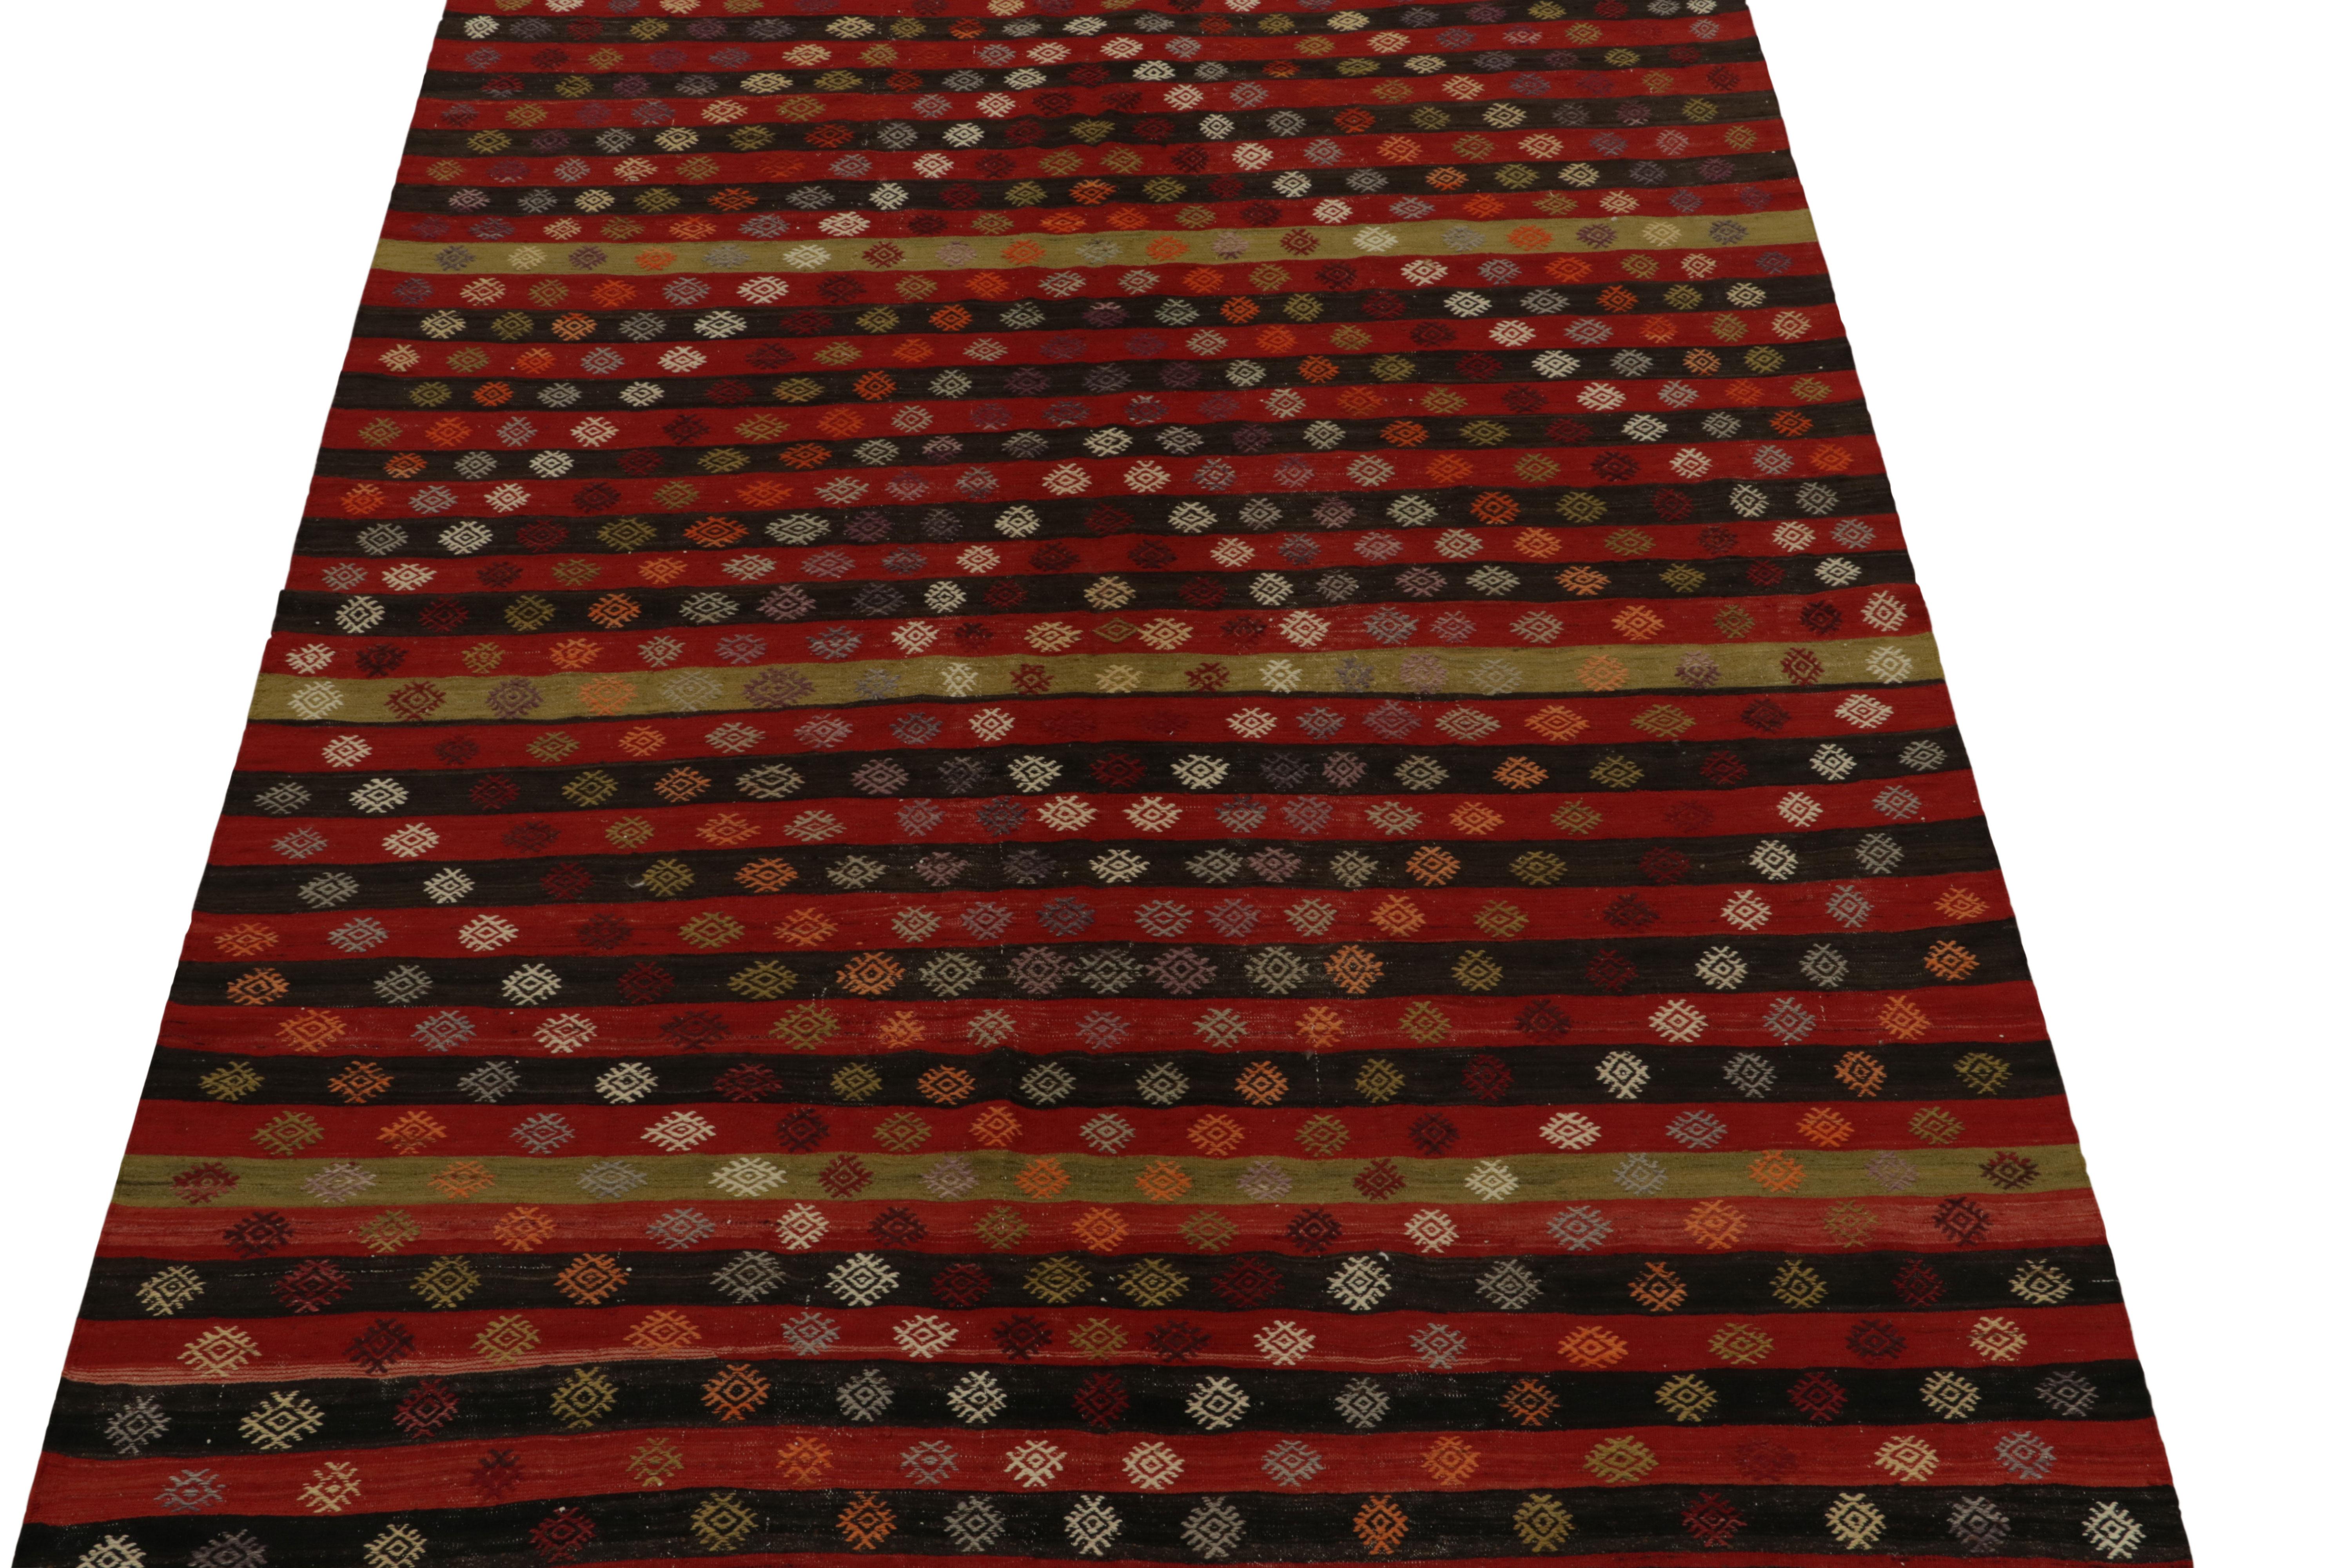 Hand-Woven 1940s Vintage Turkish Kilim in Red, White Geometric Patterns by Rug & Kilim For Sale